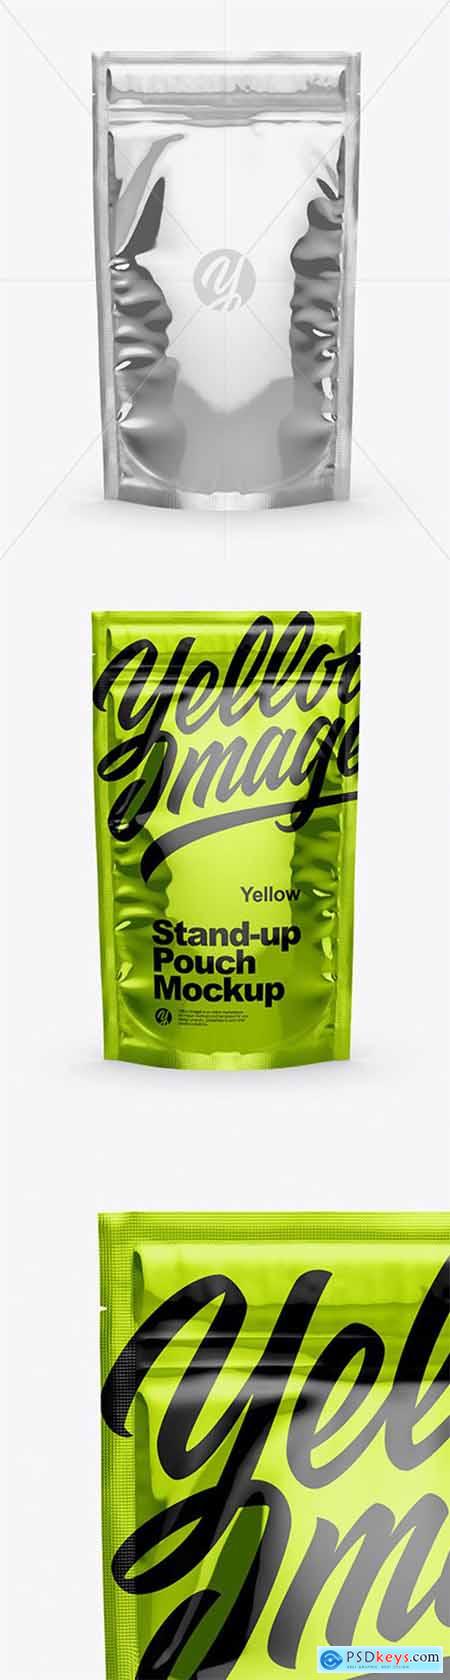 Download Glossy Metallic Stand Up Pouch With Zipper Mockup 51162 Free Download Photoshop Vector Stock Image Via Torrent Zippyshare From Psdkeys Com